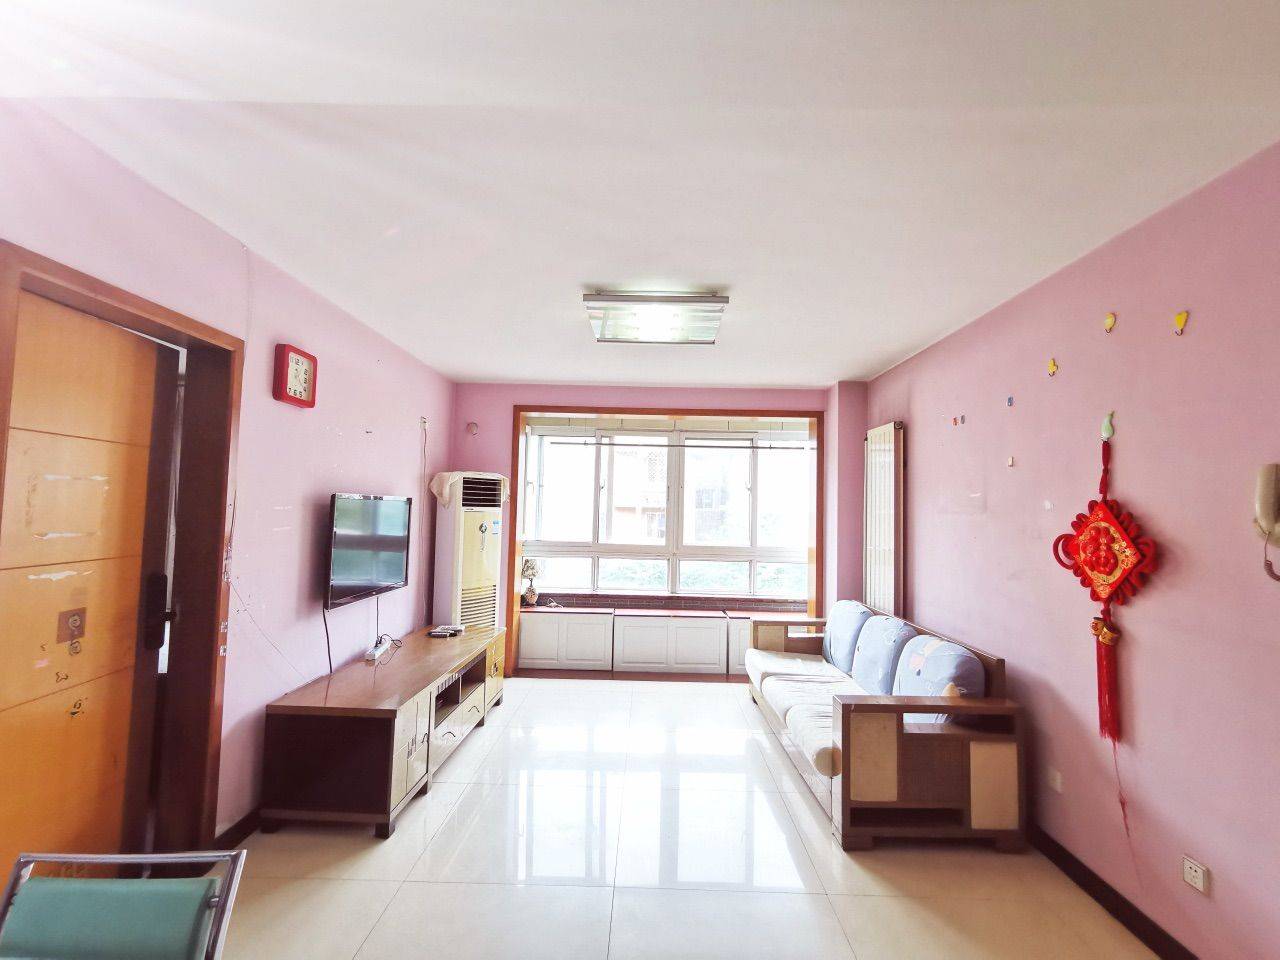 Beijing-Changping-Cozy Home,Clean&Comfy,No Gender Limit,Hustle & Bustle,Chilled